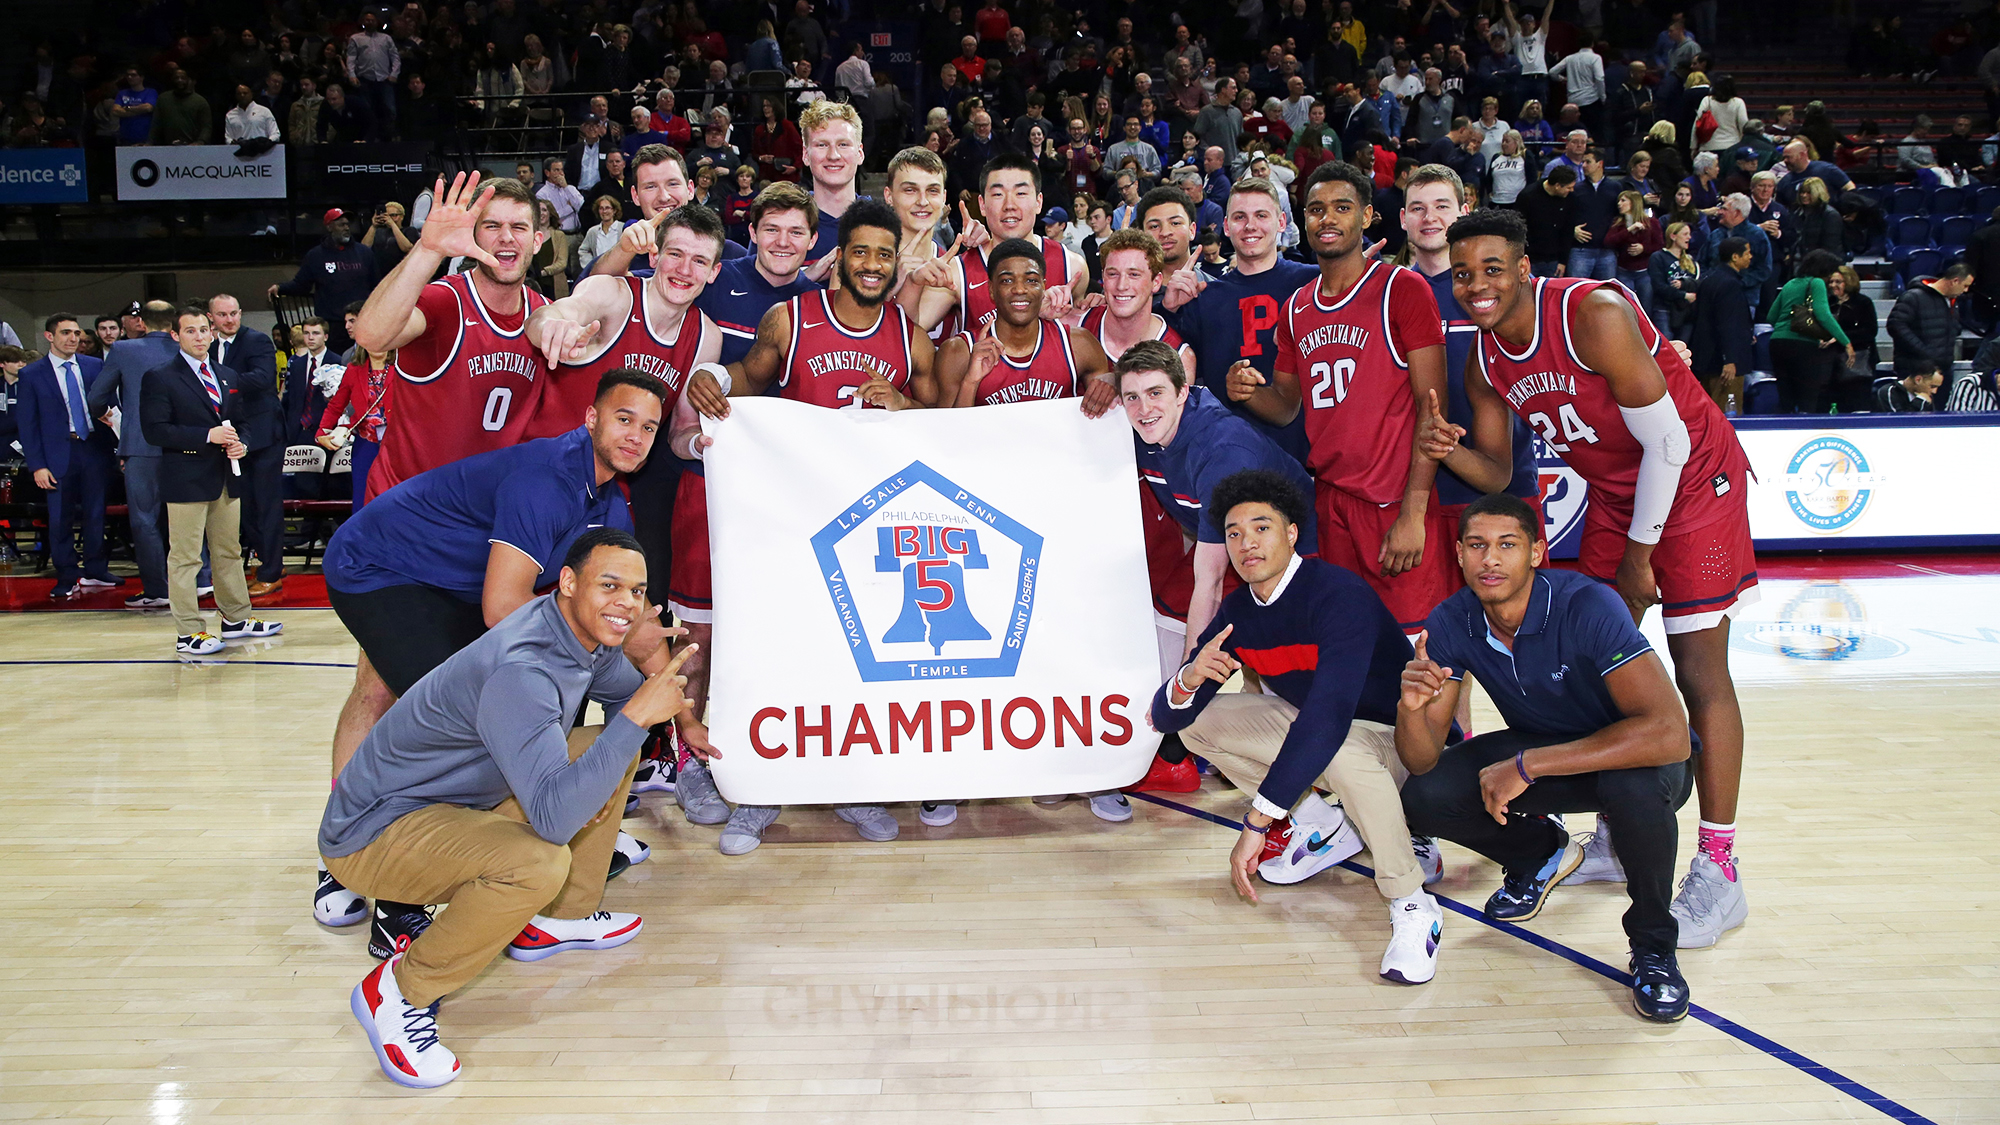 Penn basketball players holder the Big 5 championship banner on the Palestra court